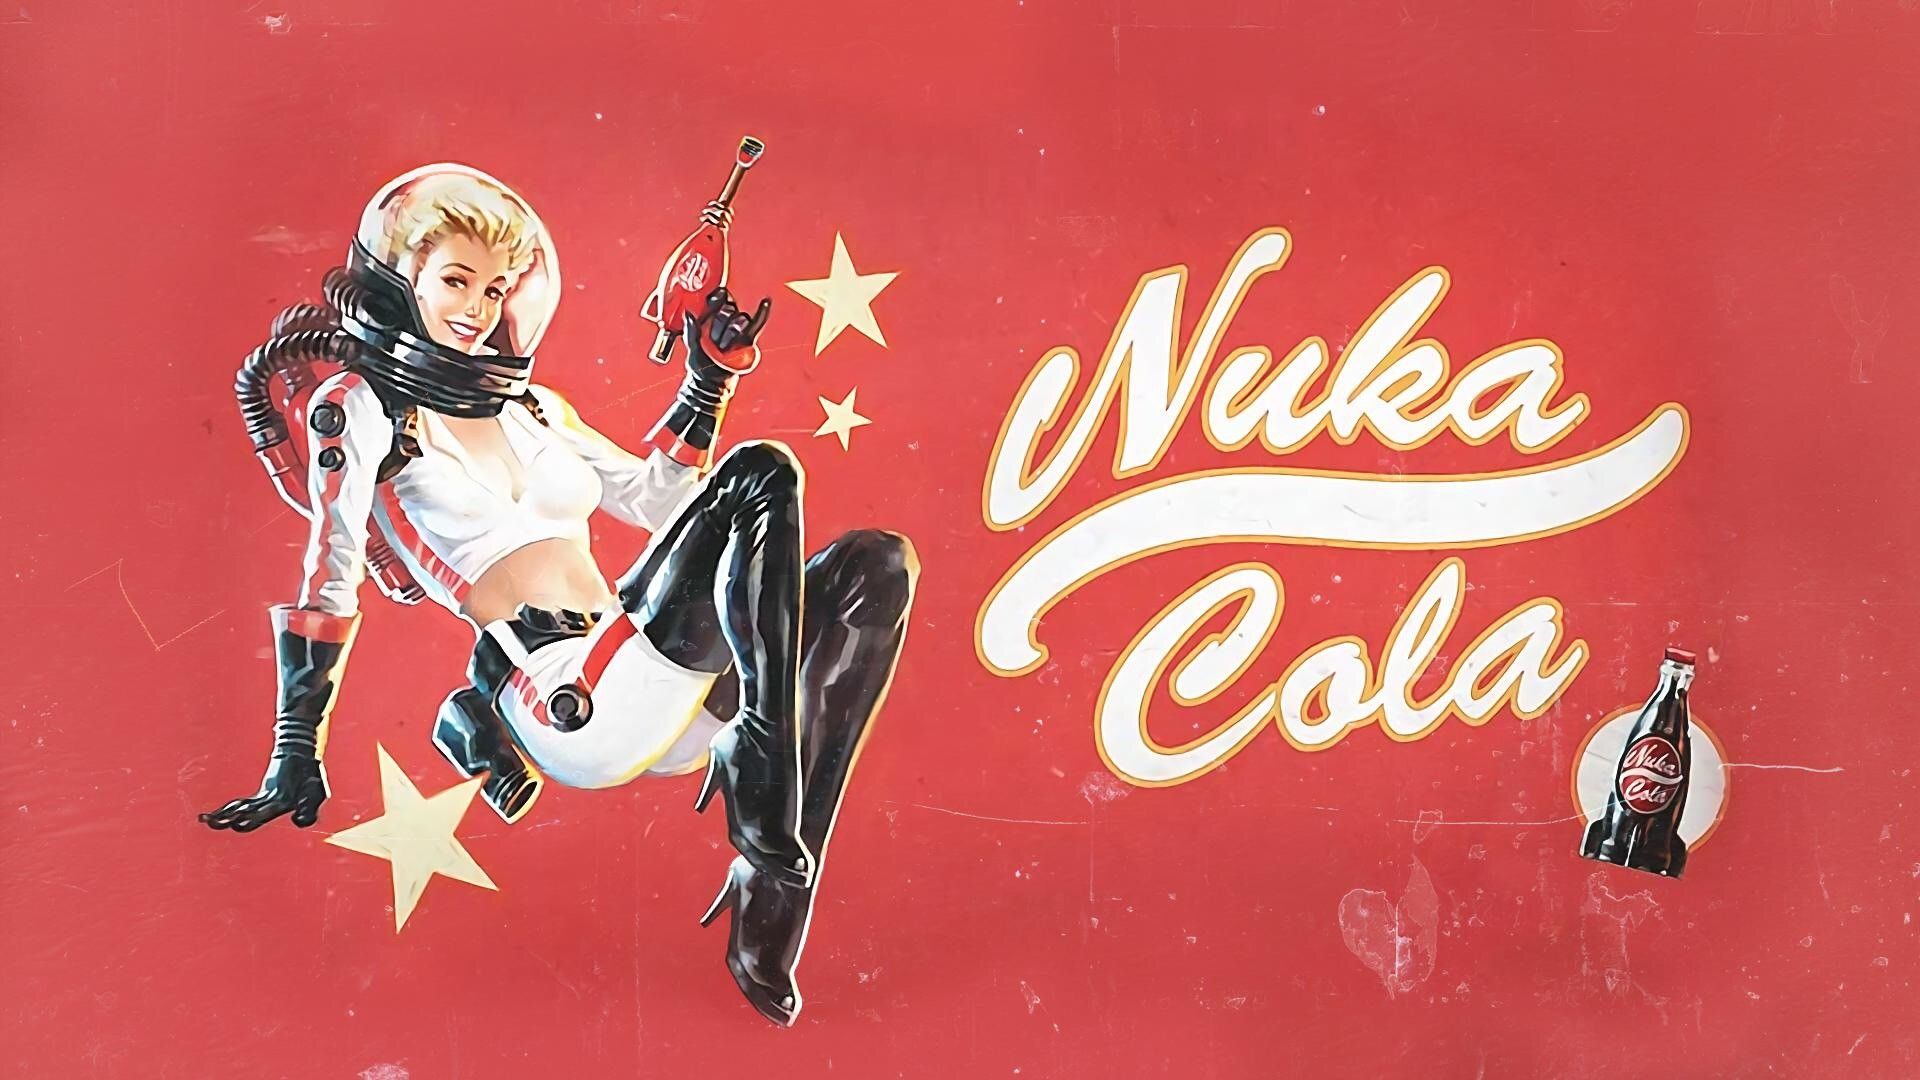 1920x1080 Wallpaper : illustration, video games, anime, red, Coca Cola, vintage, Nuka Cola, Fallout 4, pinup models, soft drink, carbonated soft drinks, cola Hanako 72096 HD Wallpapers